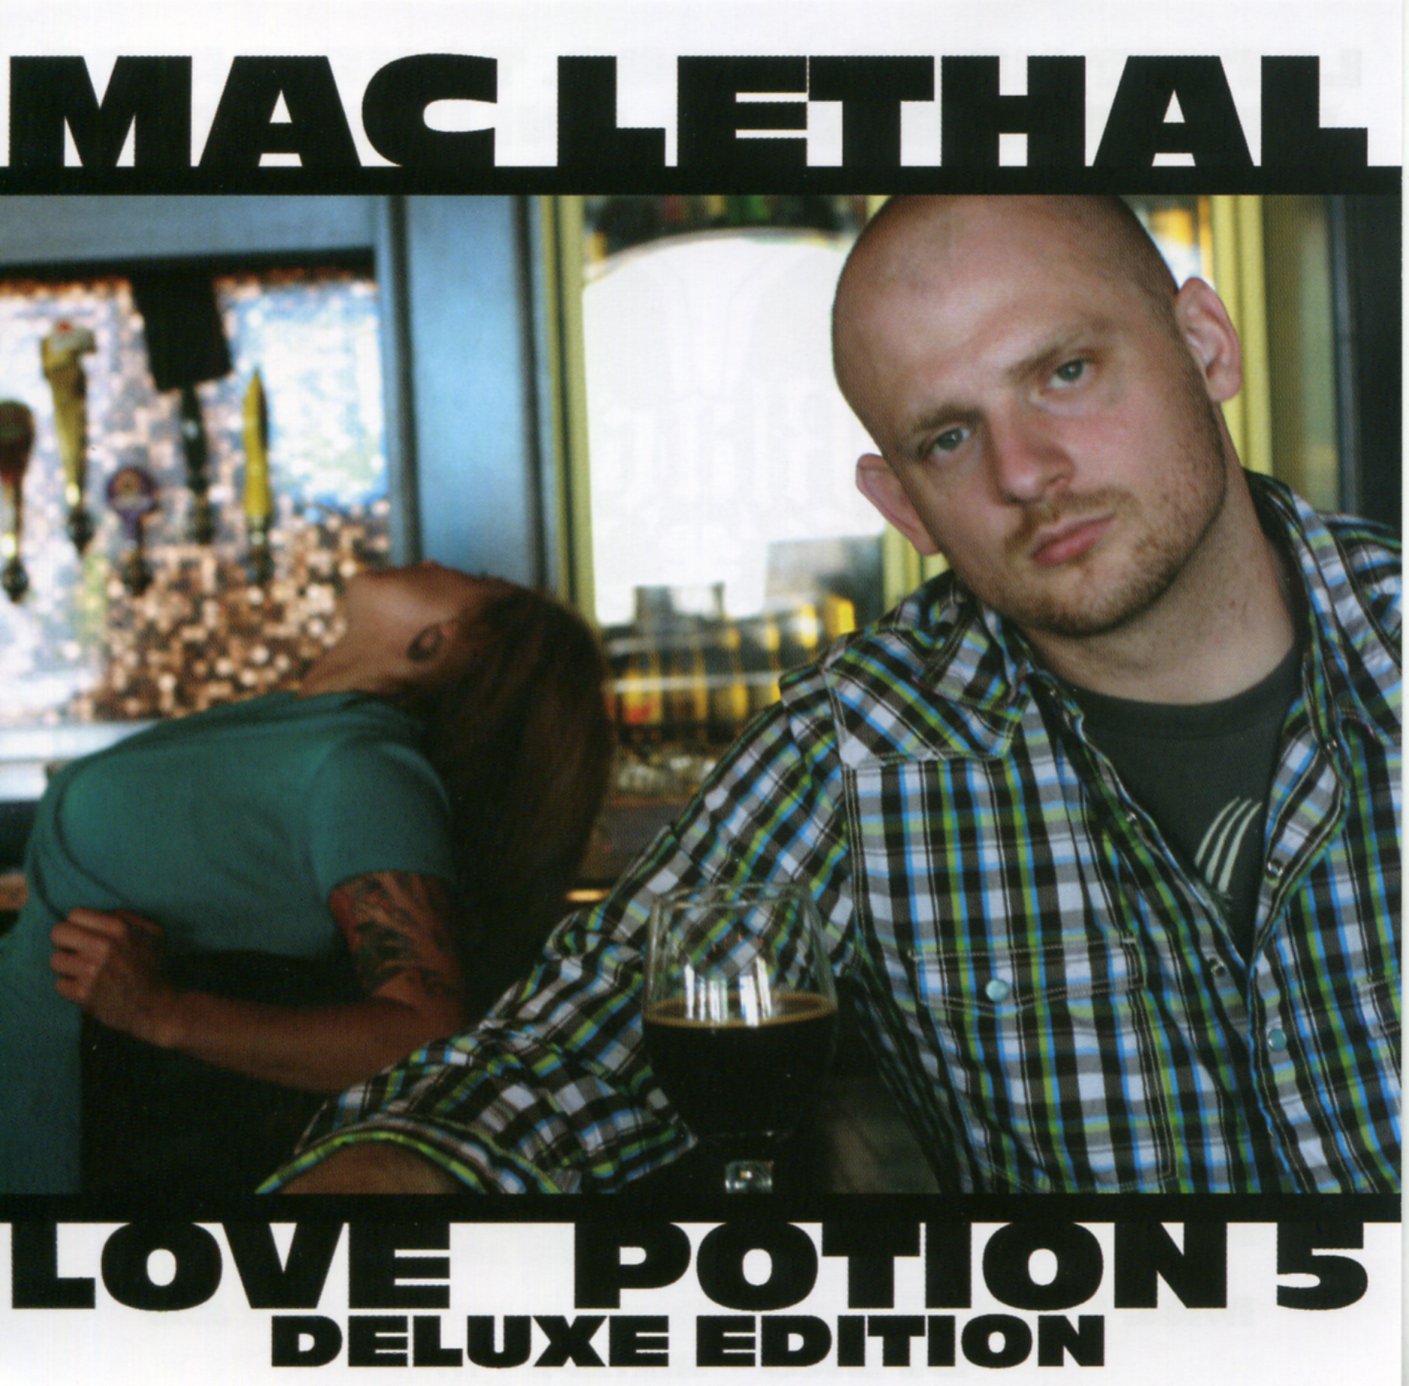 Mac Lethal | Love Potion Number 5 Deluxe Edition